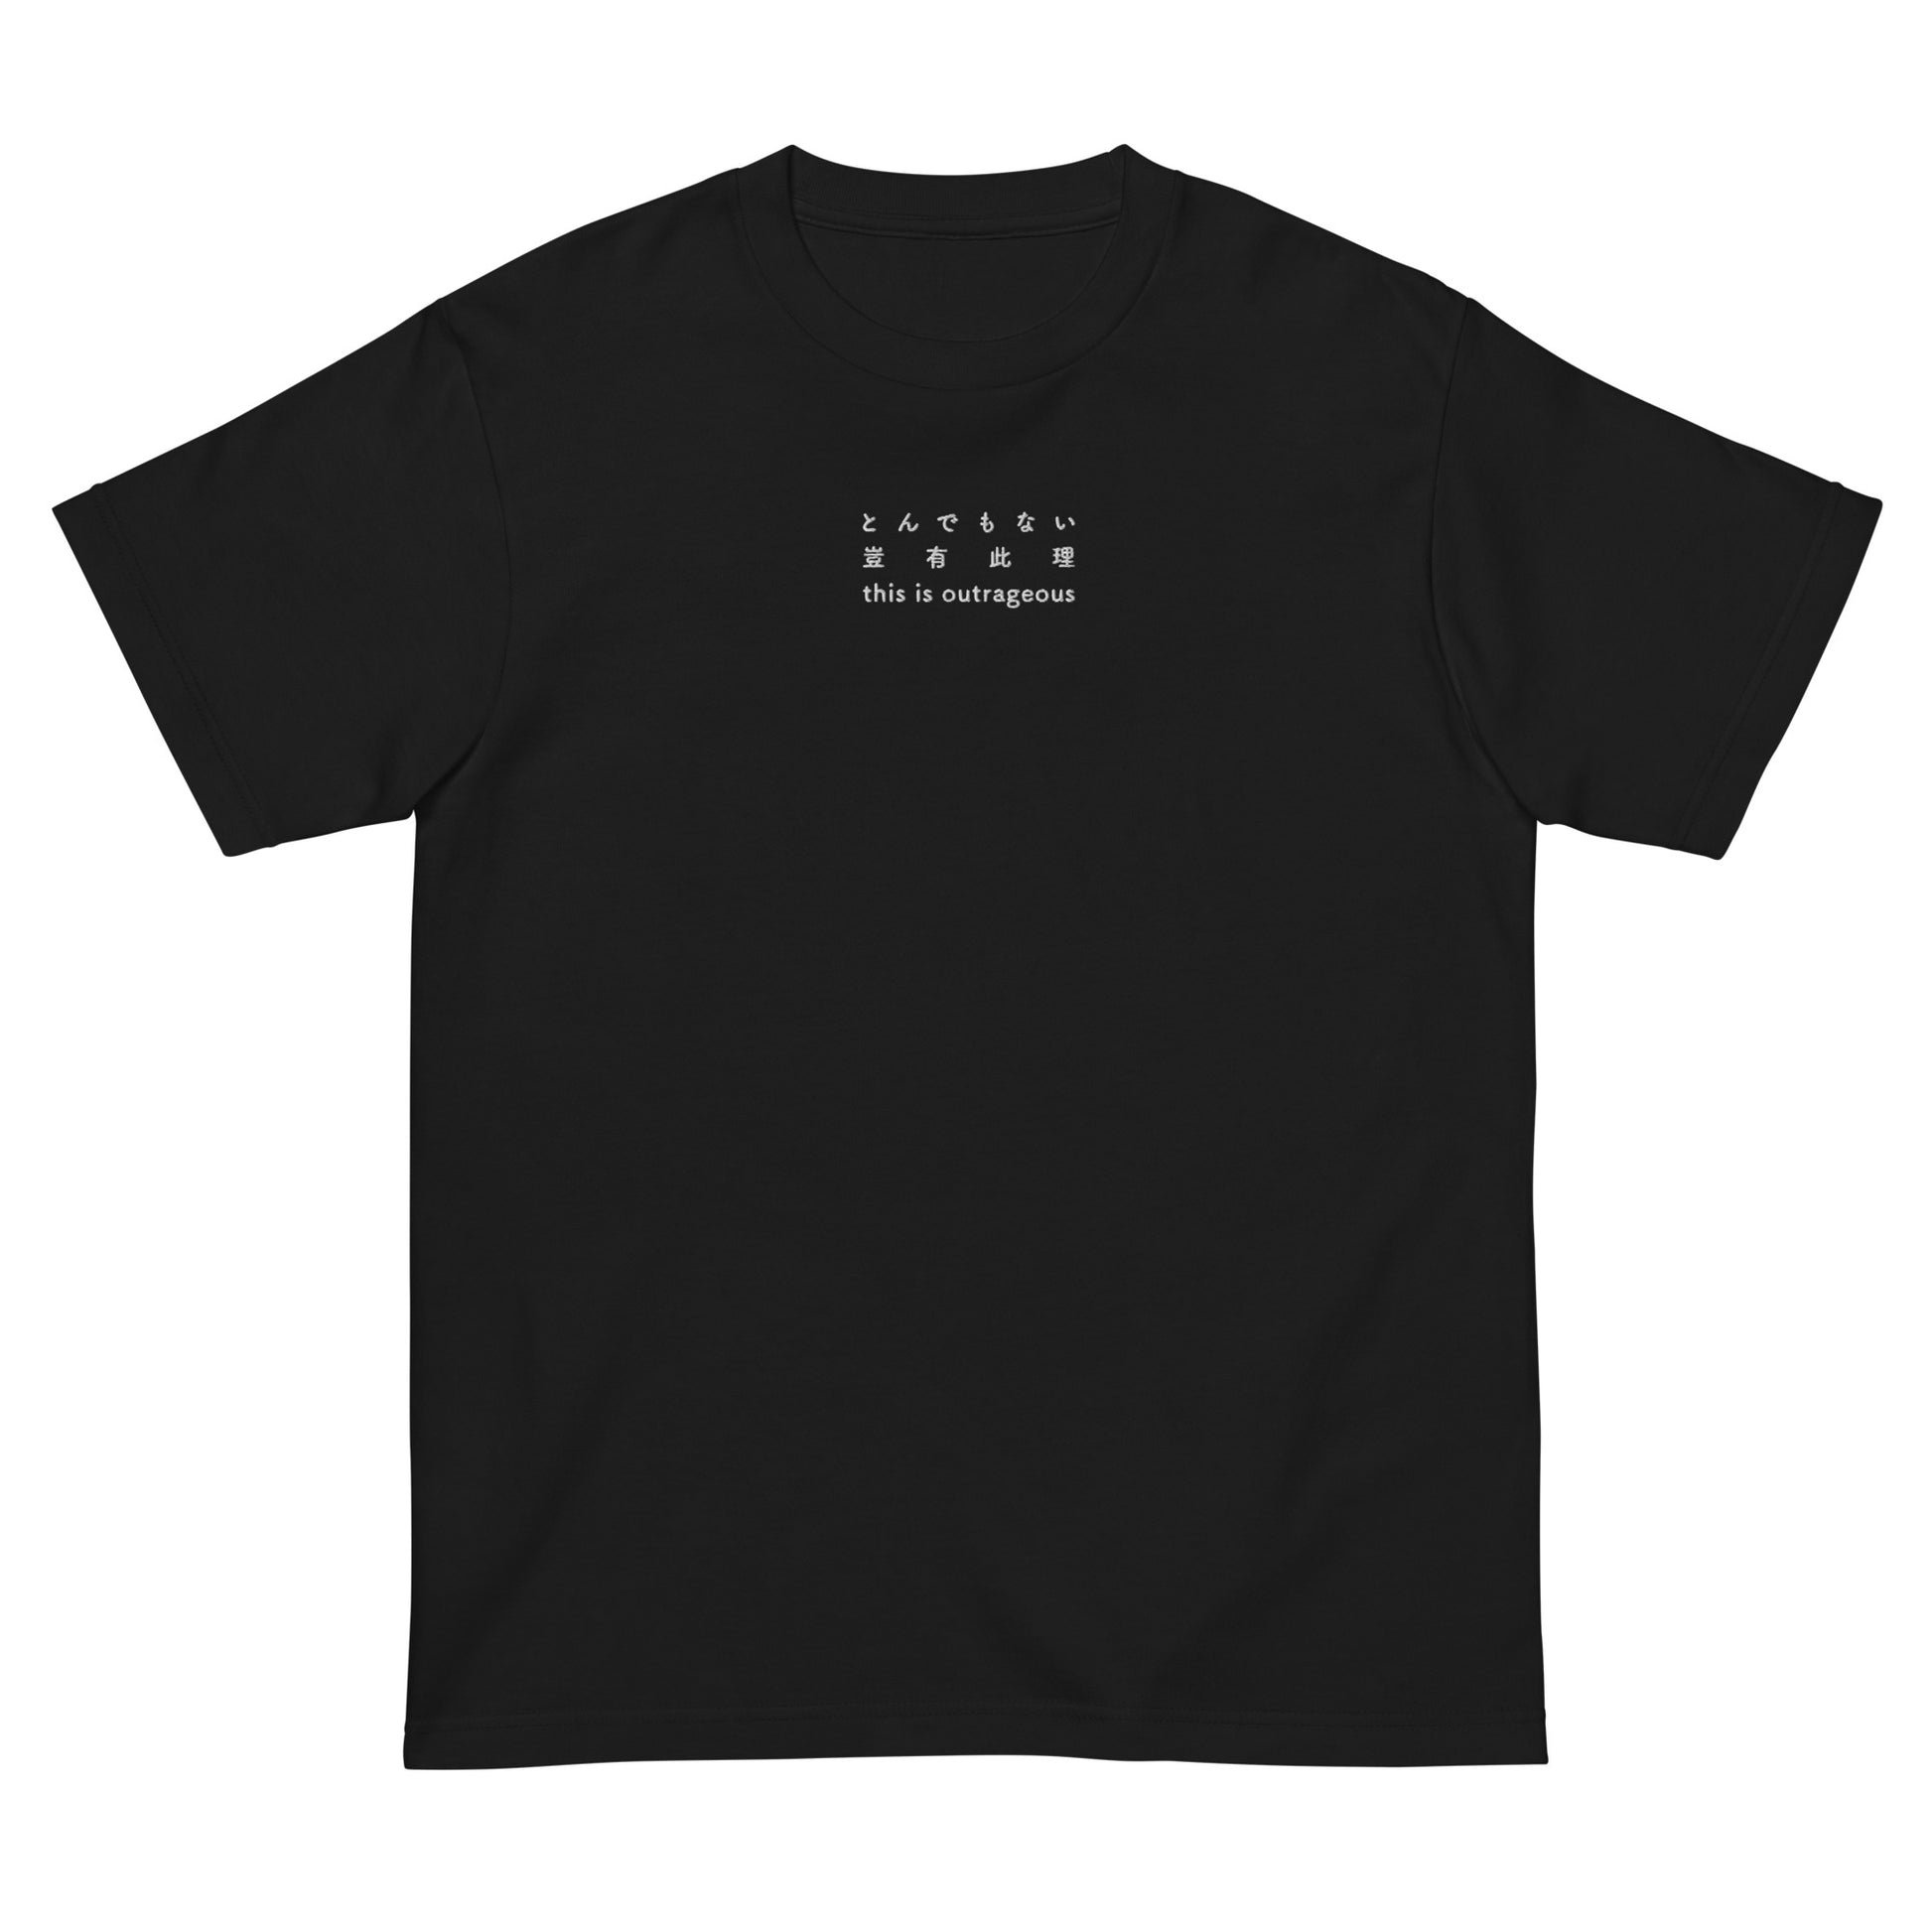 Black High Quality Tee - Front Design with an White Embroidery "This is Outrageous" in Japanese, Chinese and English